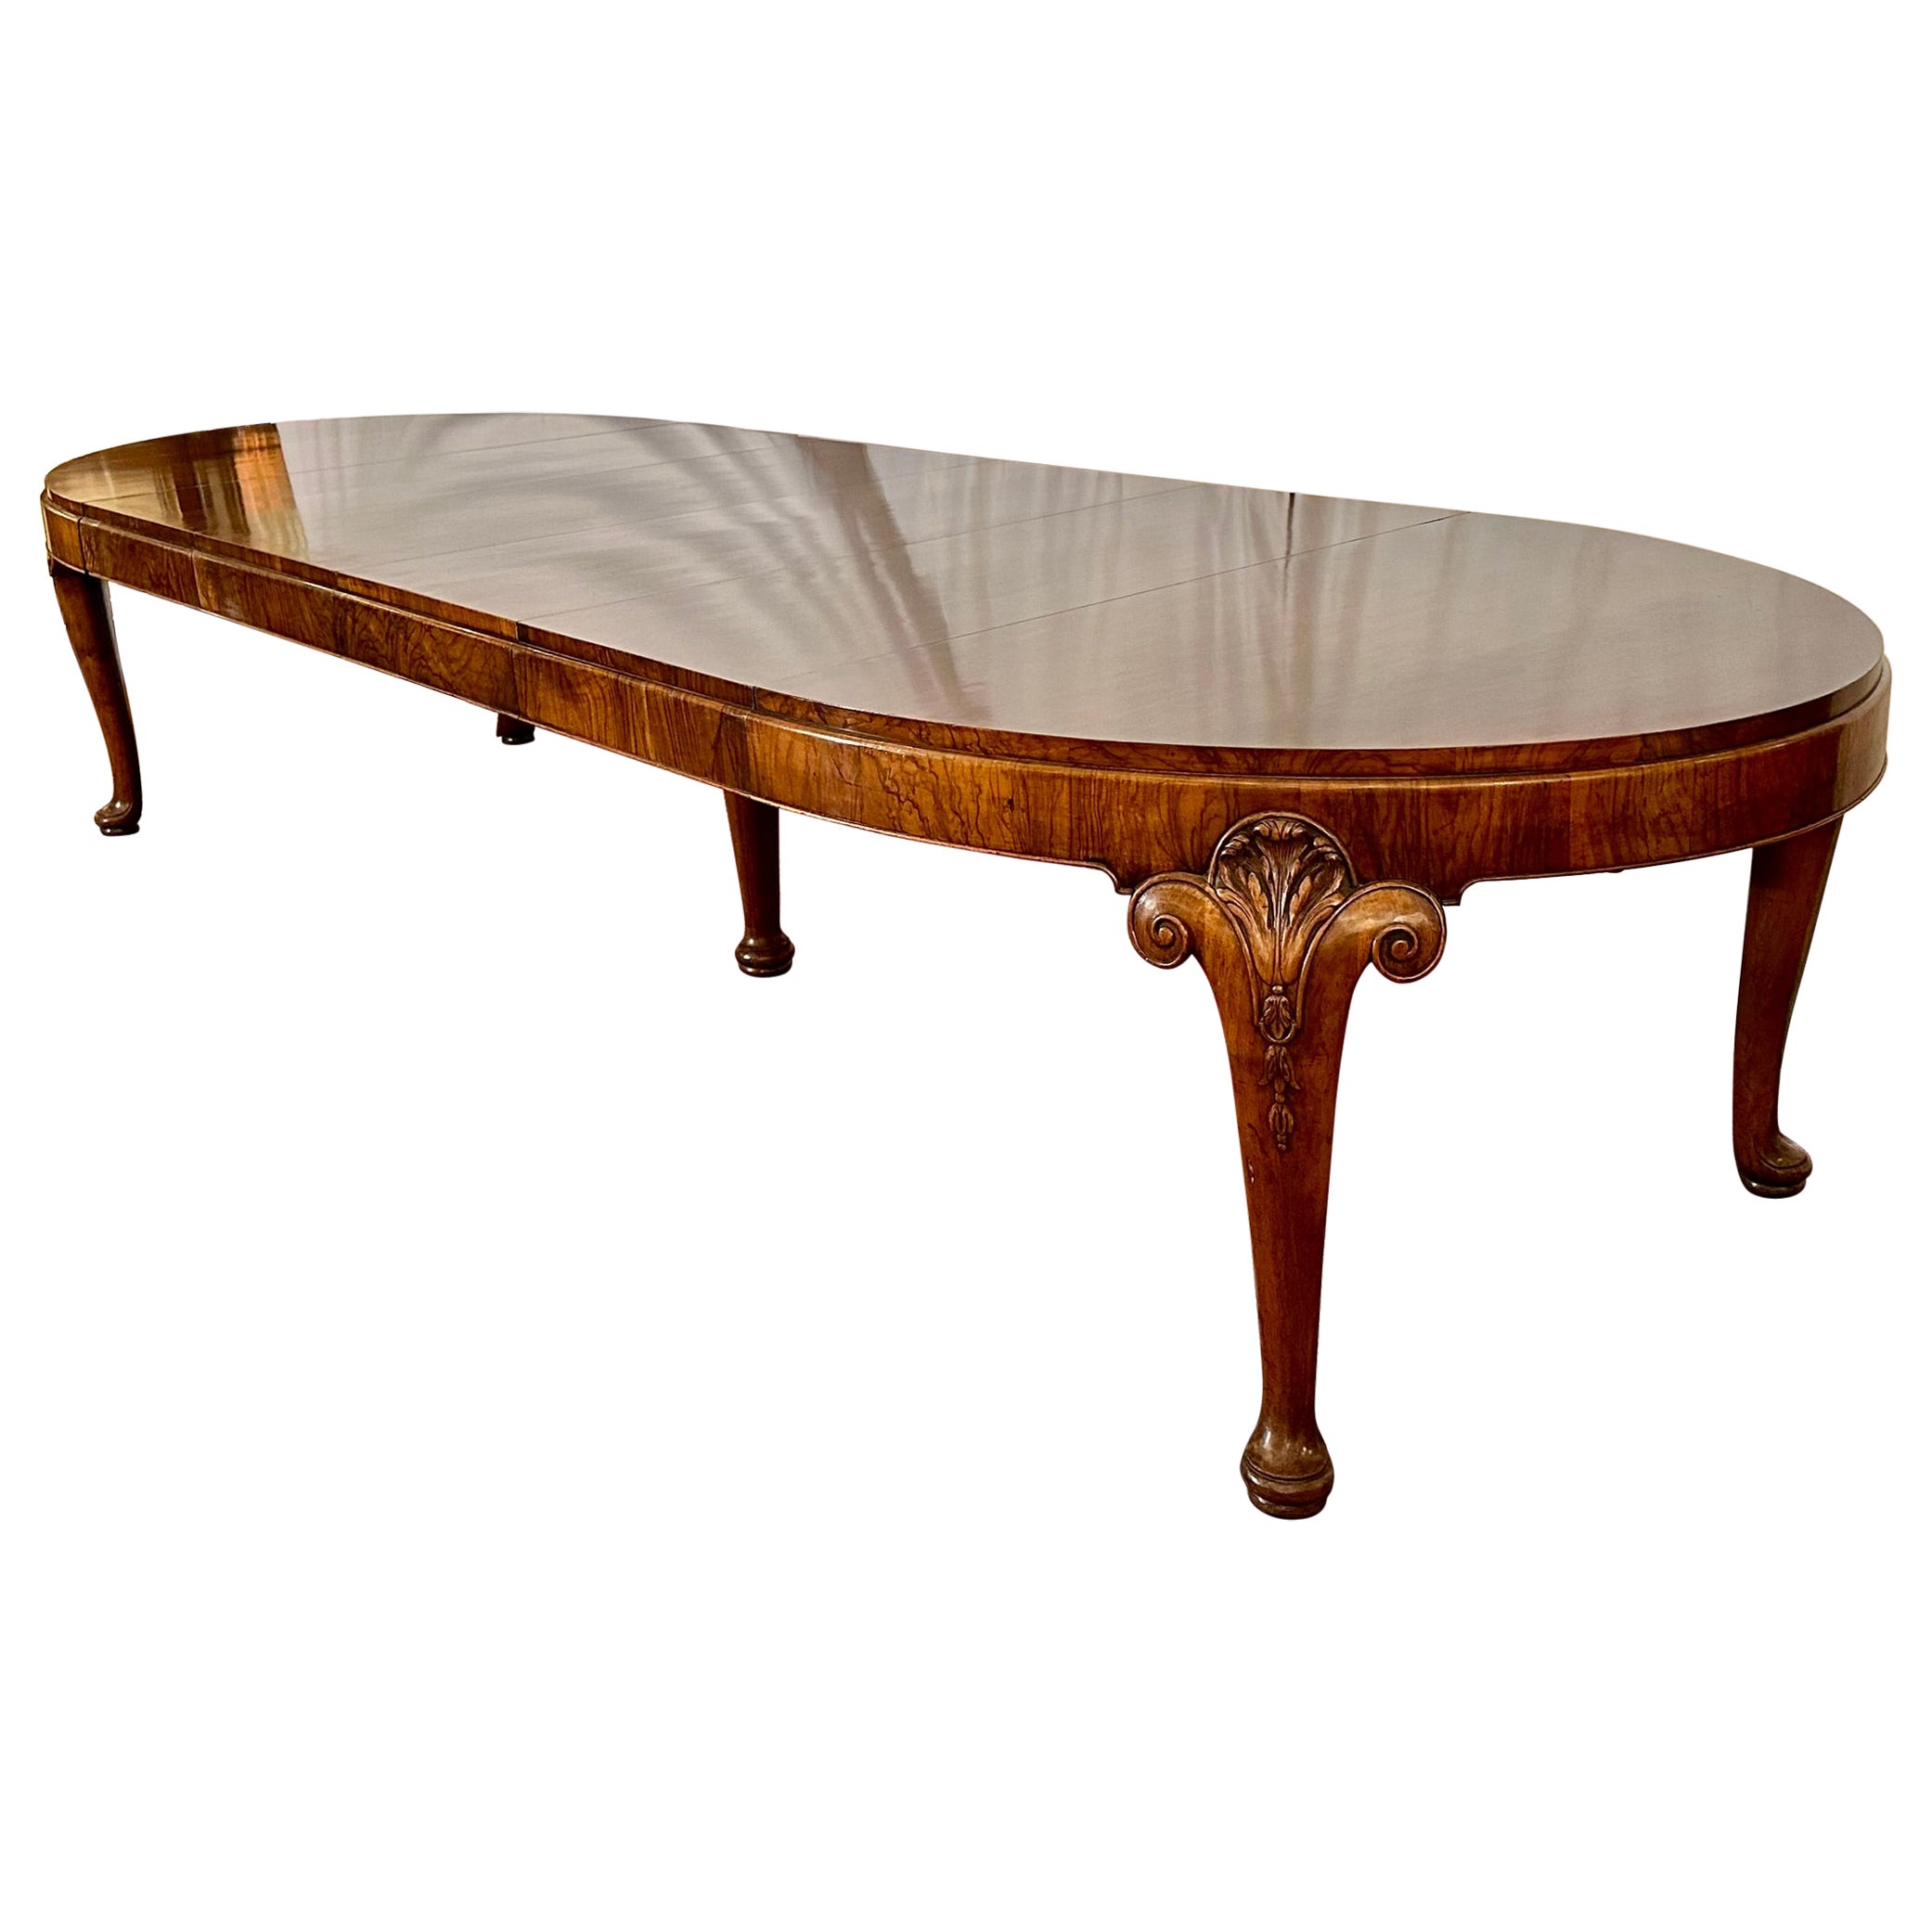 Antique English "Waring & Gillow" Burled Walnut Dining Table, Circa 1890. For Sale